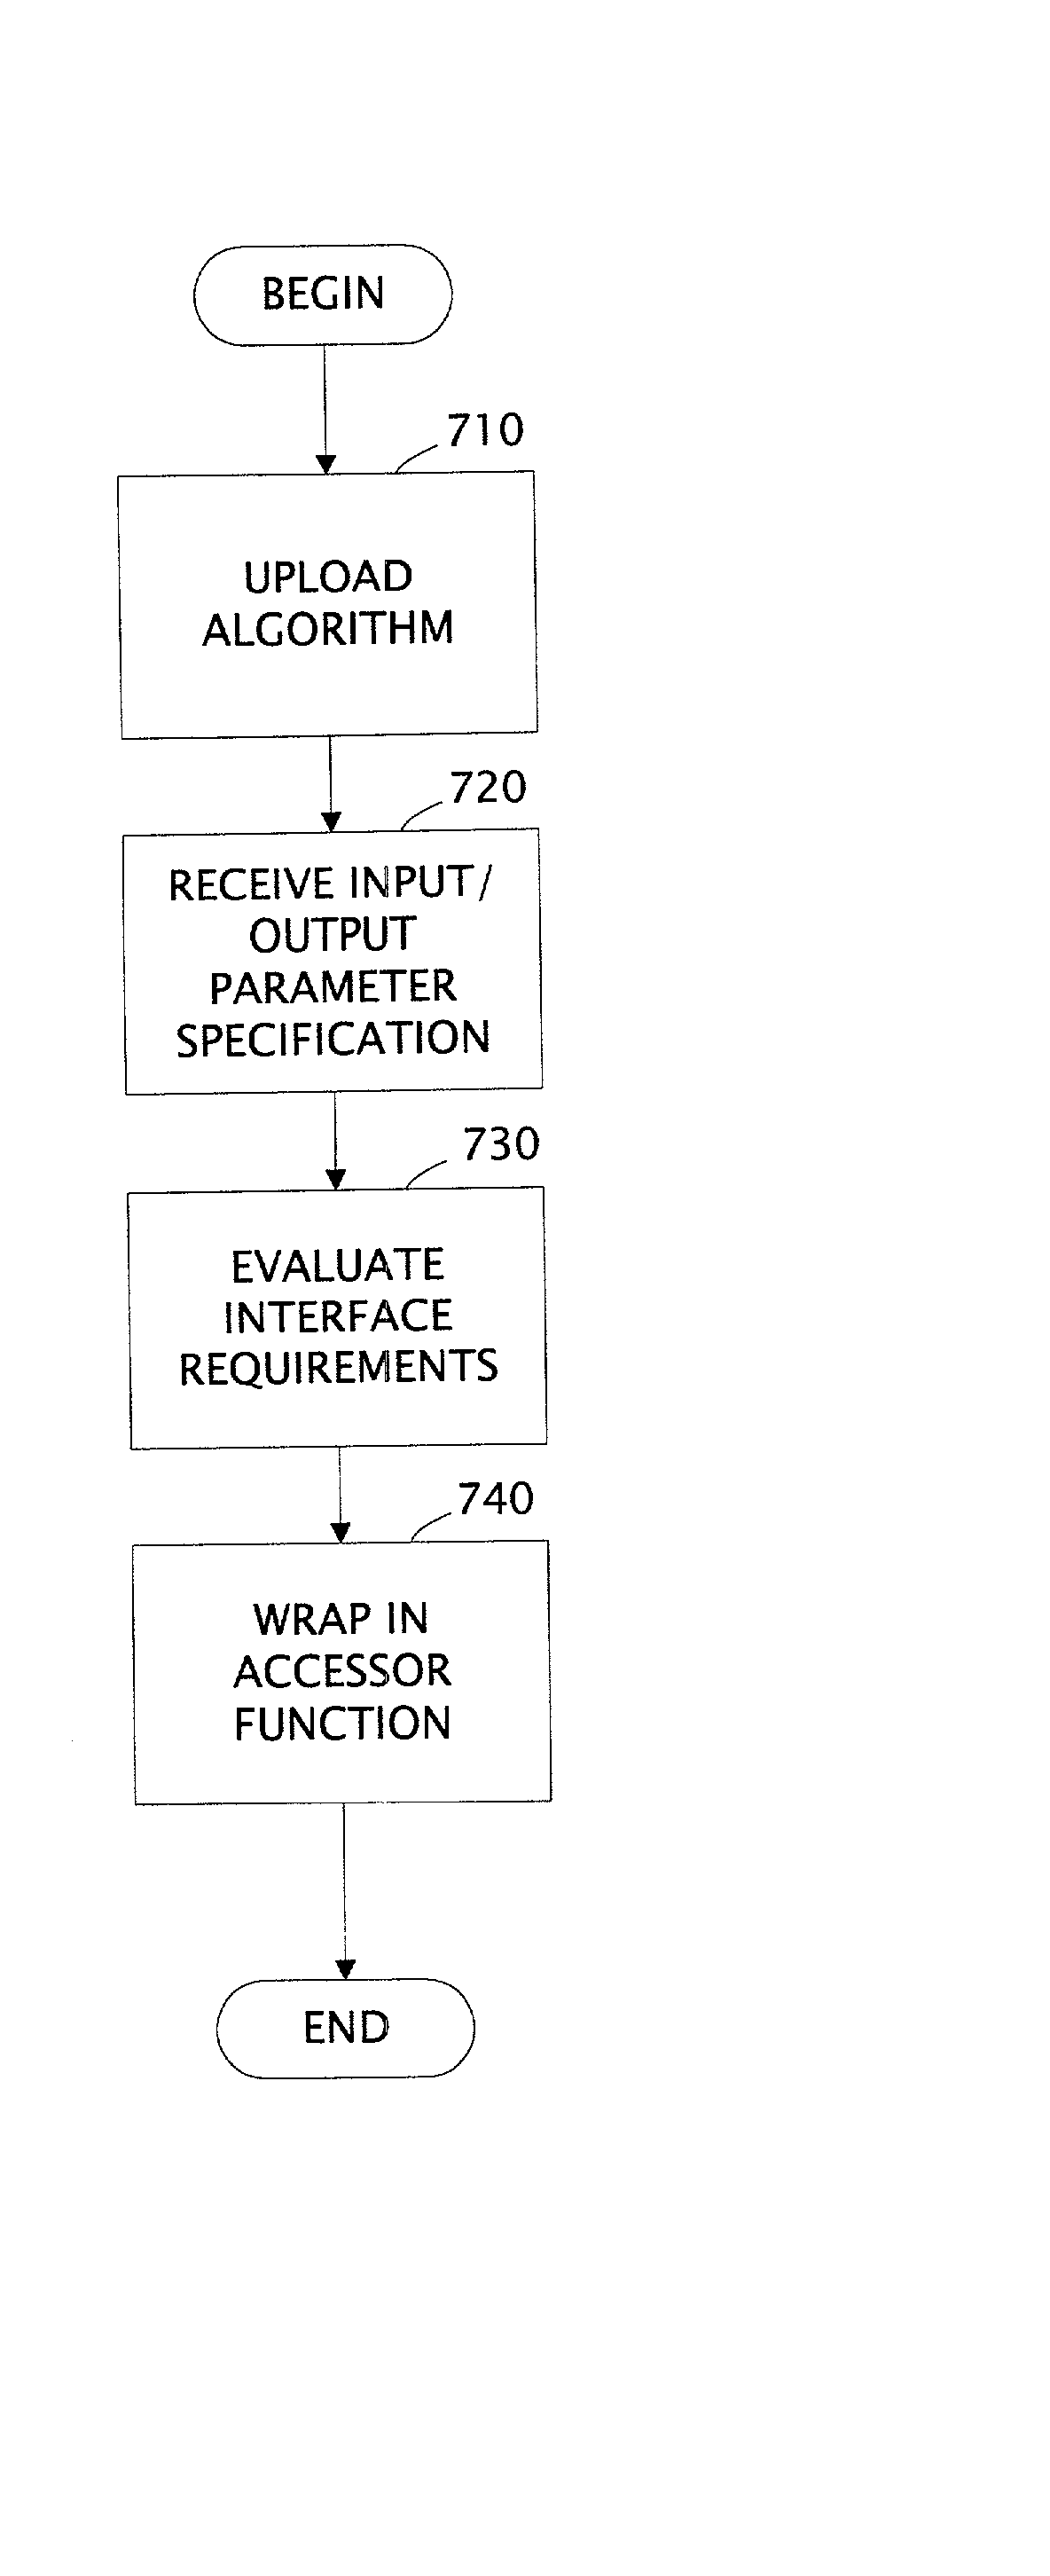 Data mining apparatus and method with user interface based ground-truth tool and user algorithms